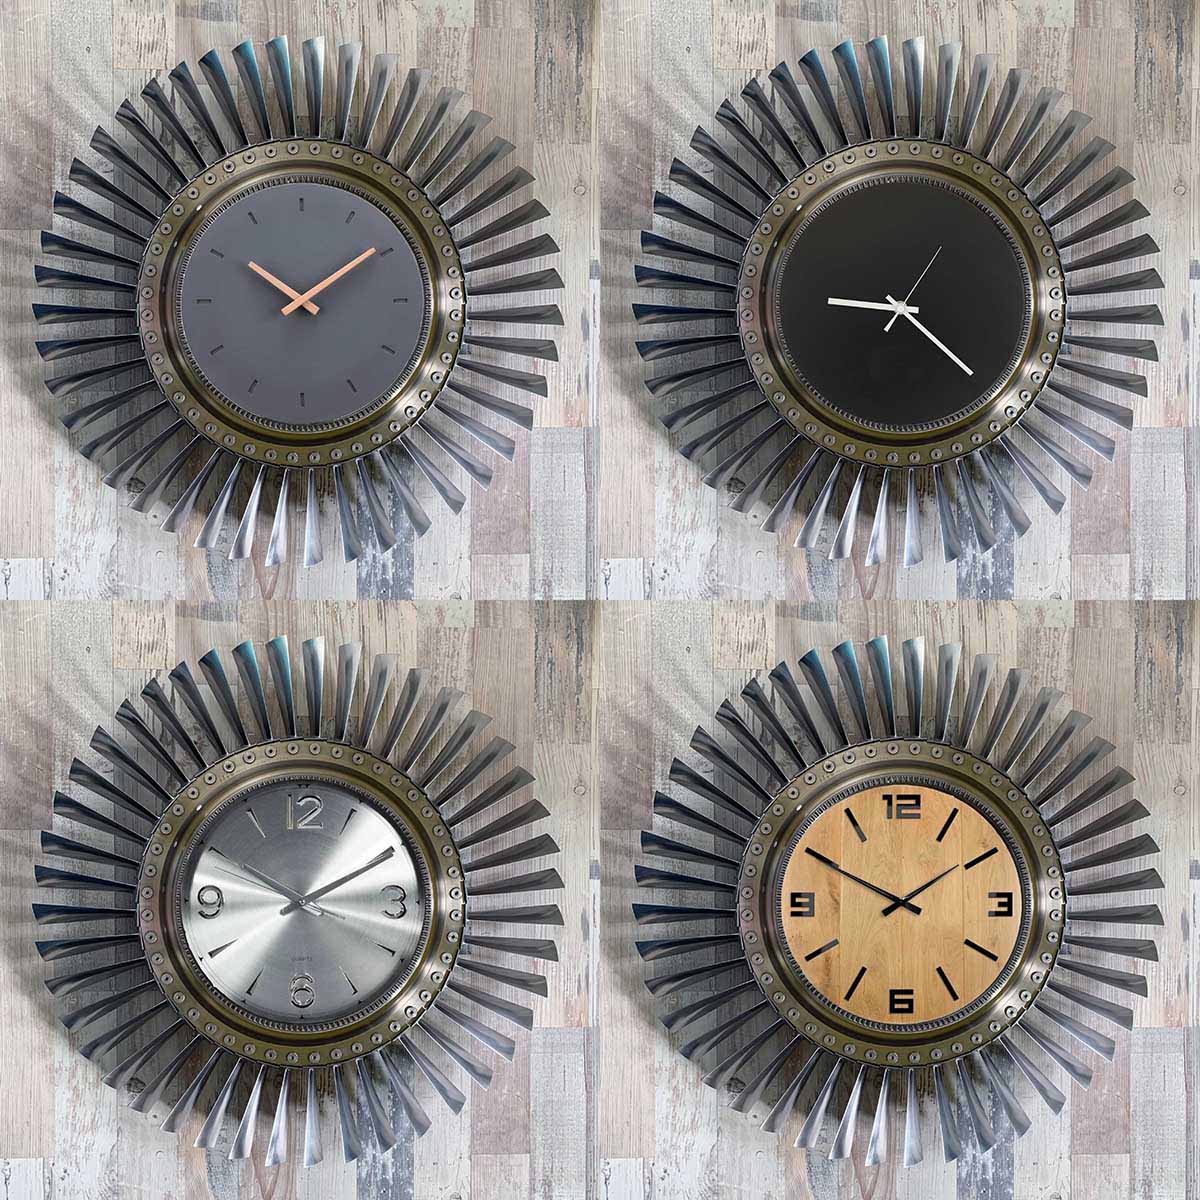 Photo showing four different versions of a clock that was made from parts of a fighter jet engine.